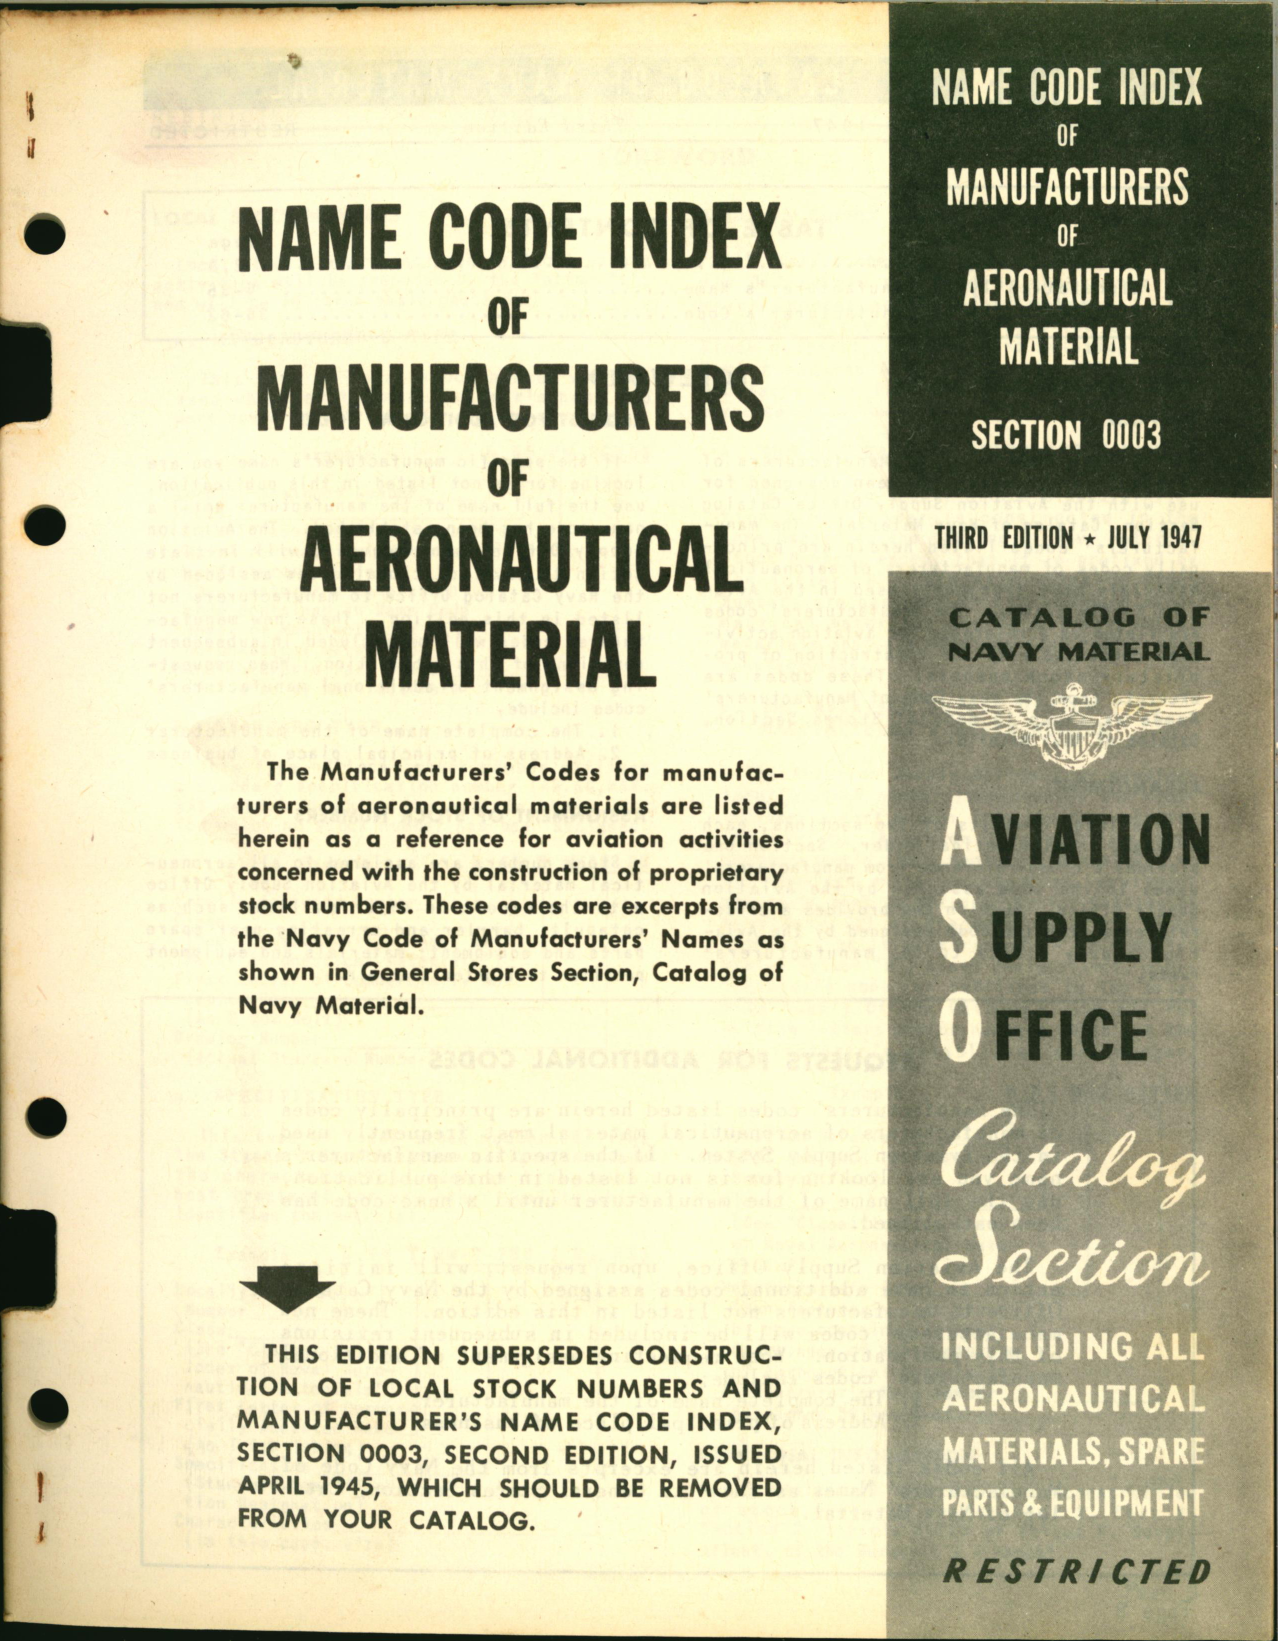 Sample page 1 from AirCorps Library document: Name of Code Index of Manufacturers of Aeronautical Material